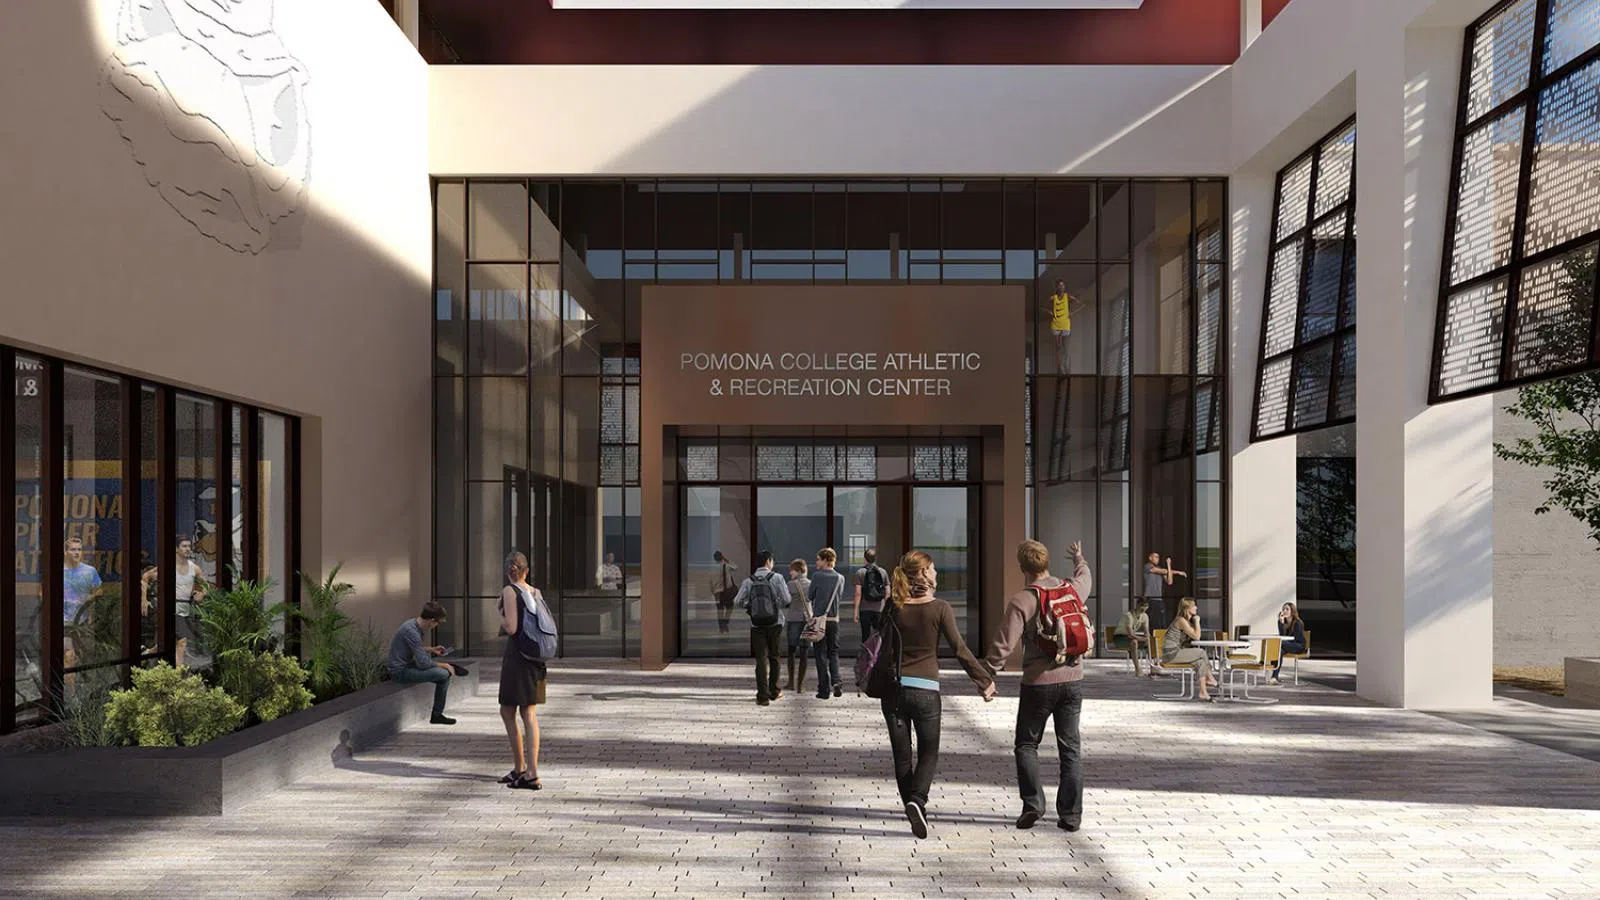 Entrance of Athletics, Recreation and Wellness Center with students